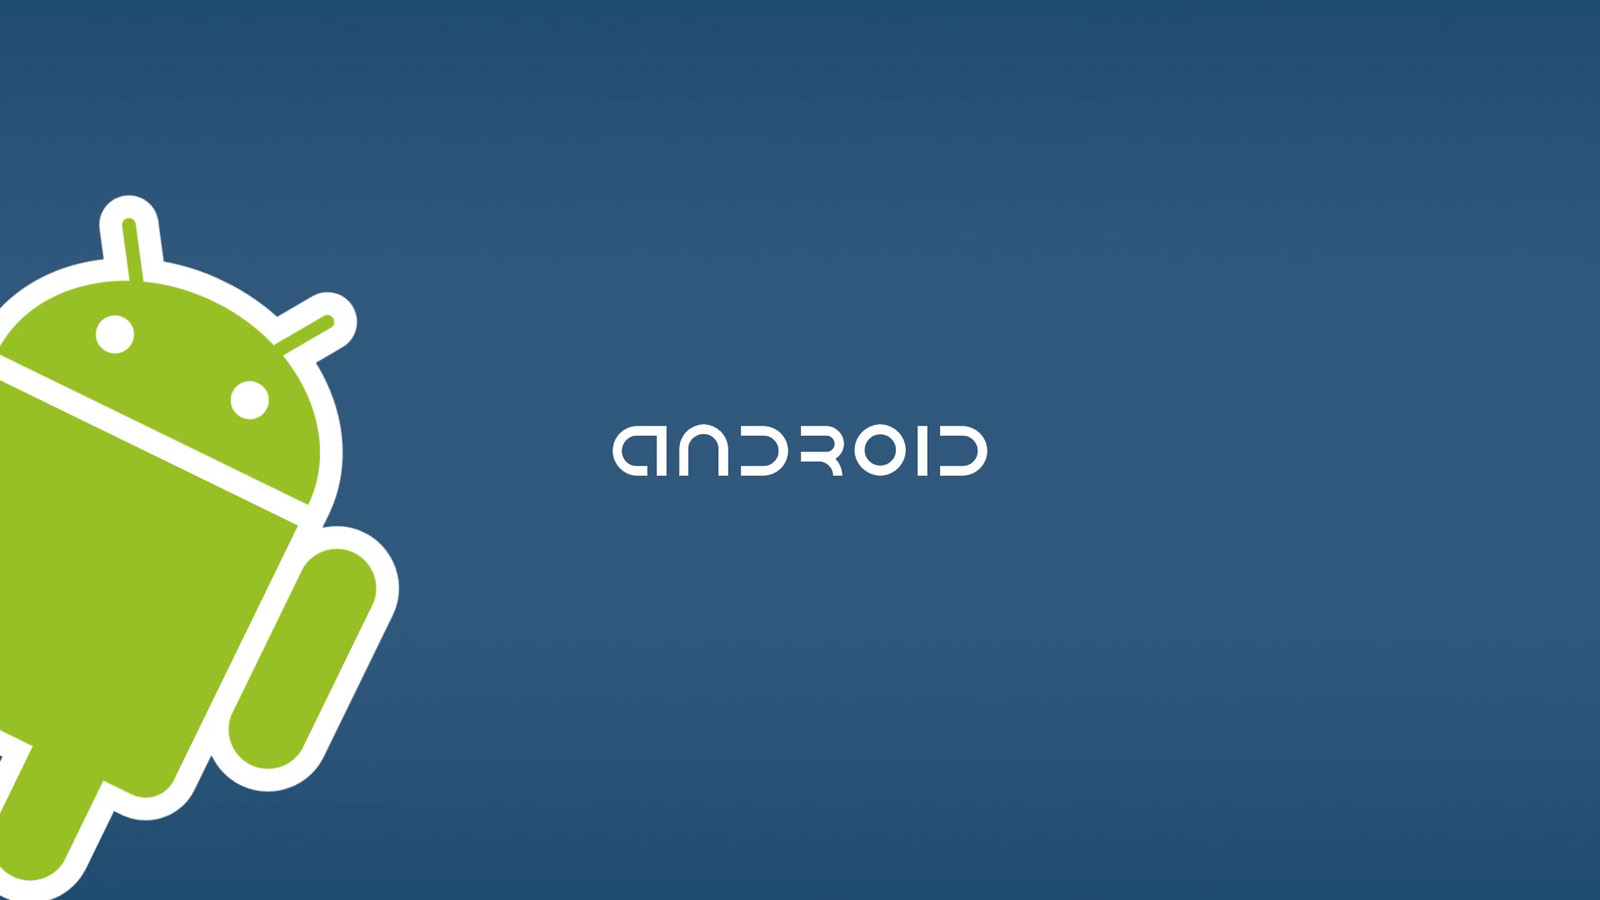 Android Google Wallpaper Background